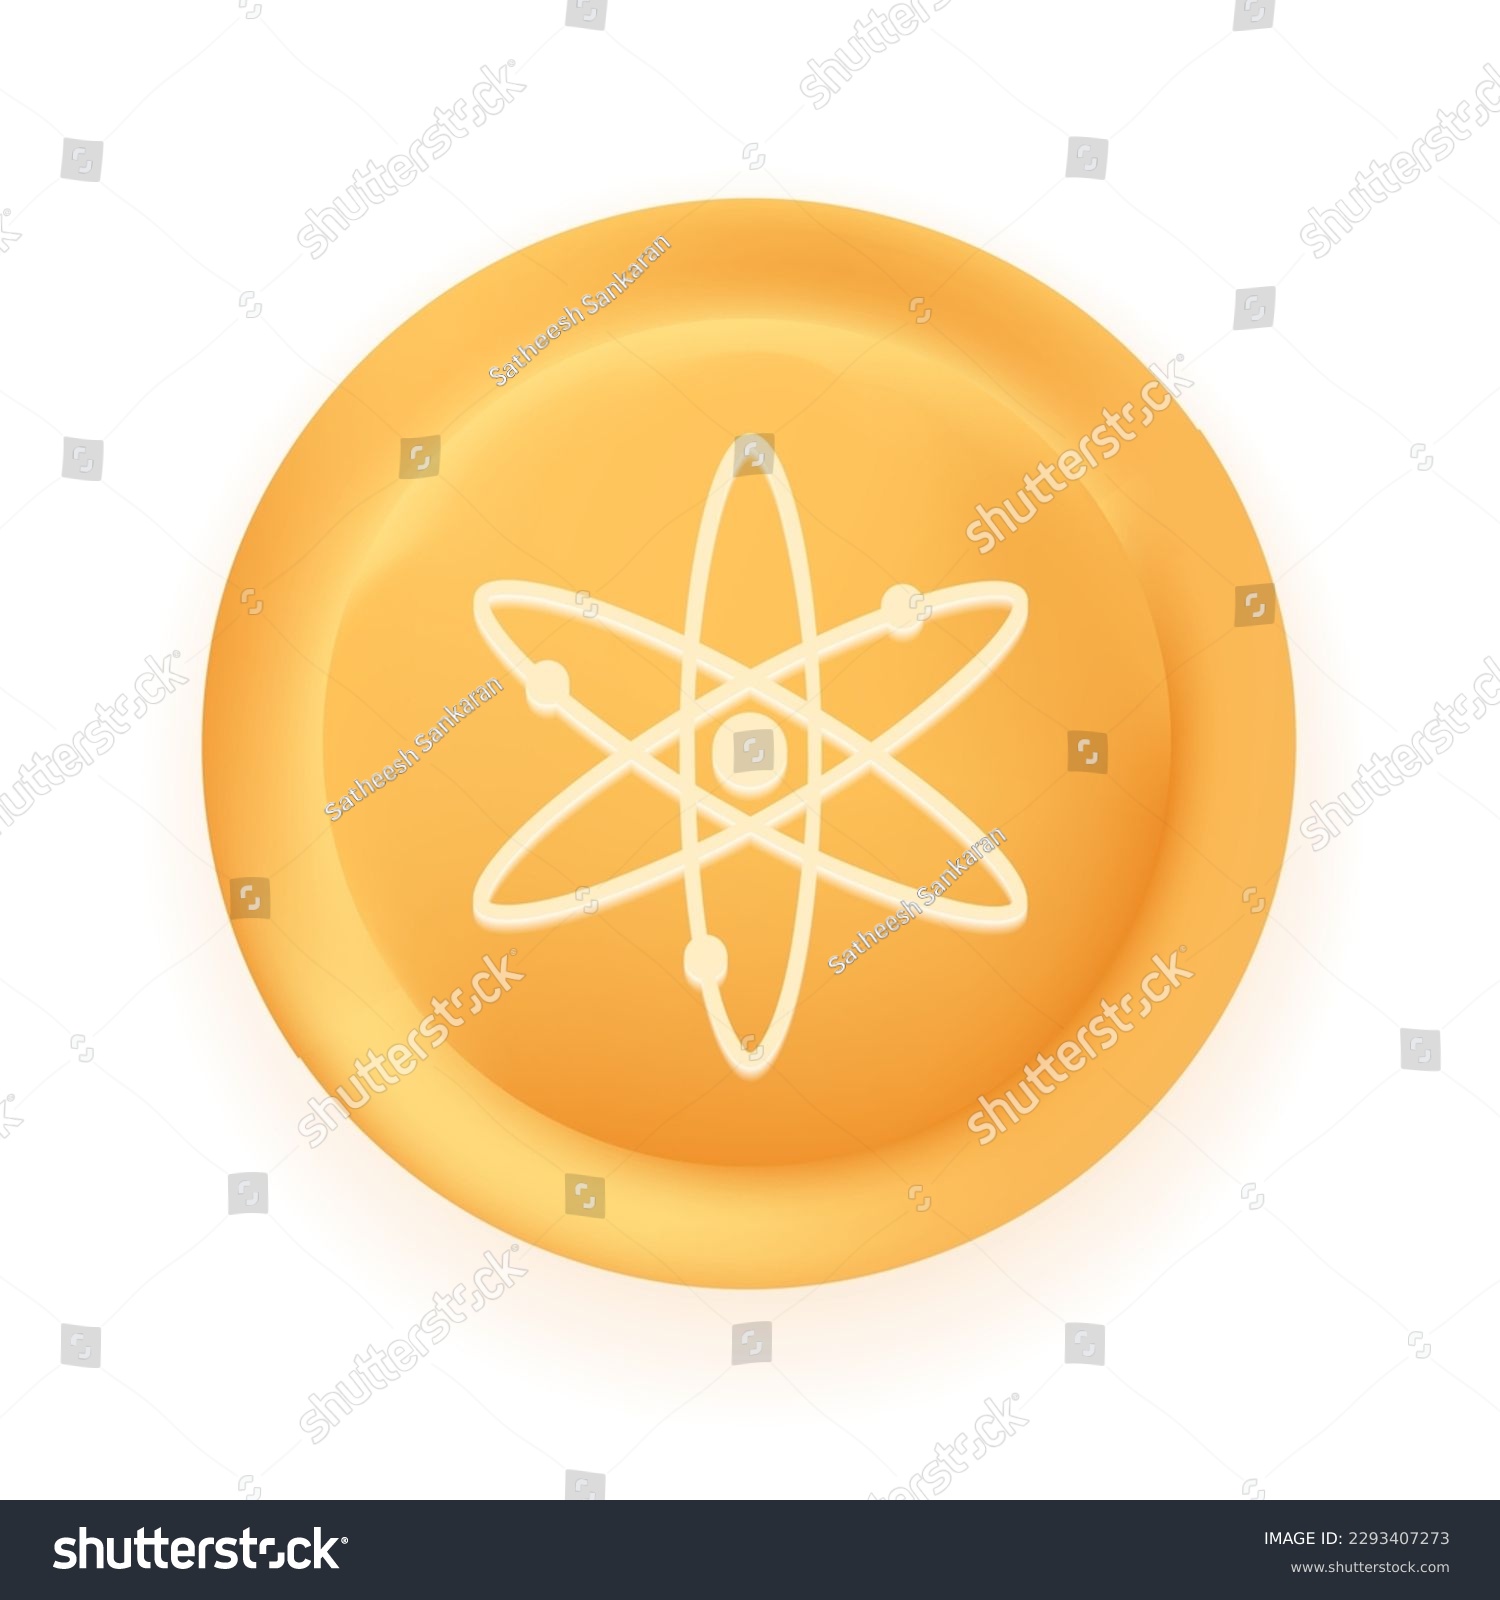 SVG of Cosmos (ATOM) crypto currency 3D coin vector illustration isolated on white background. Can be used as virtual money icon, logo, emblem, sticker and badge designs. svg